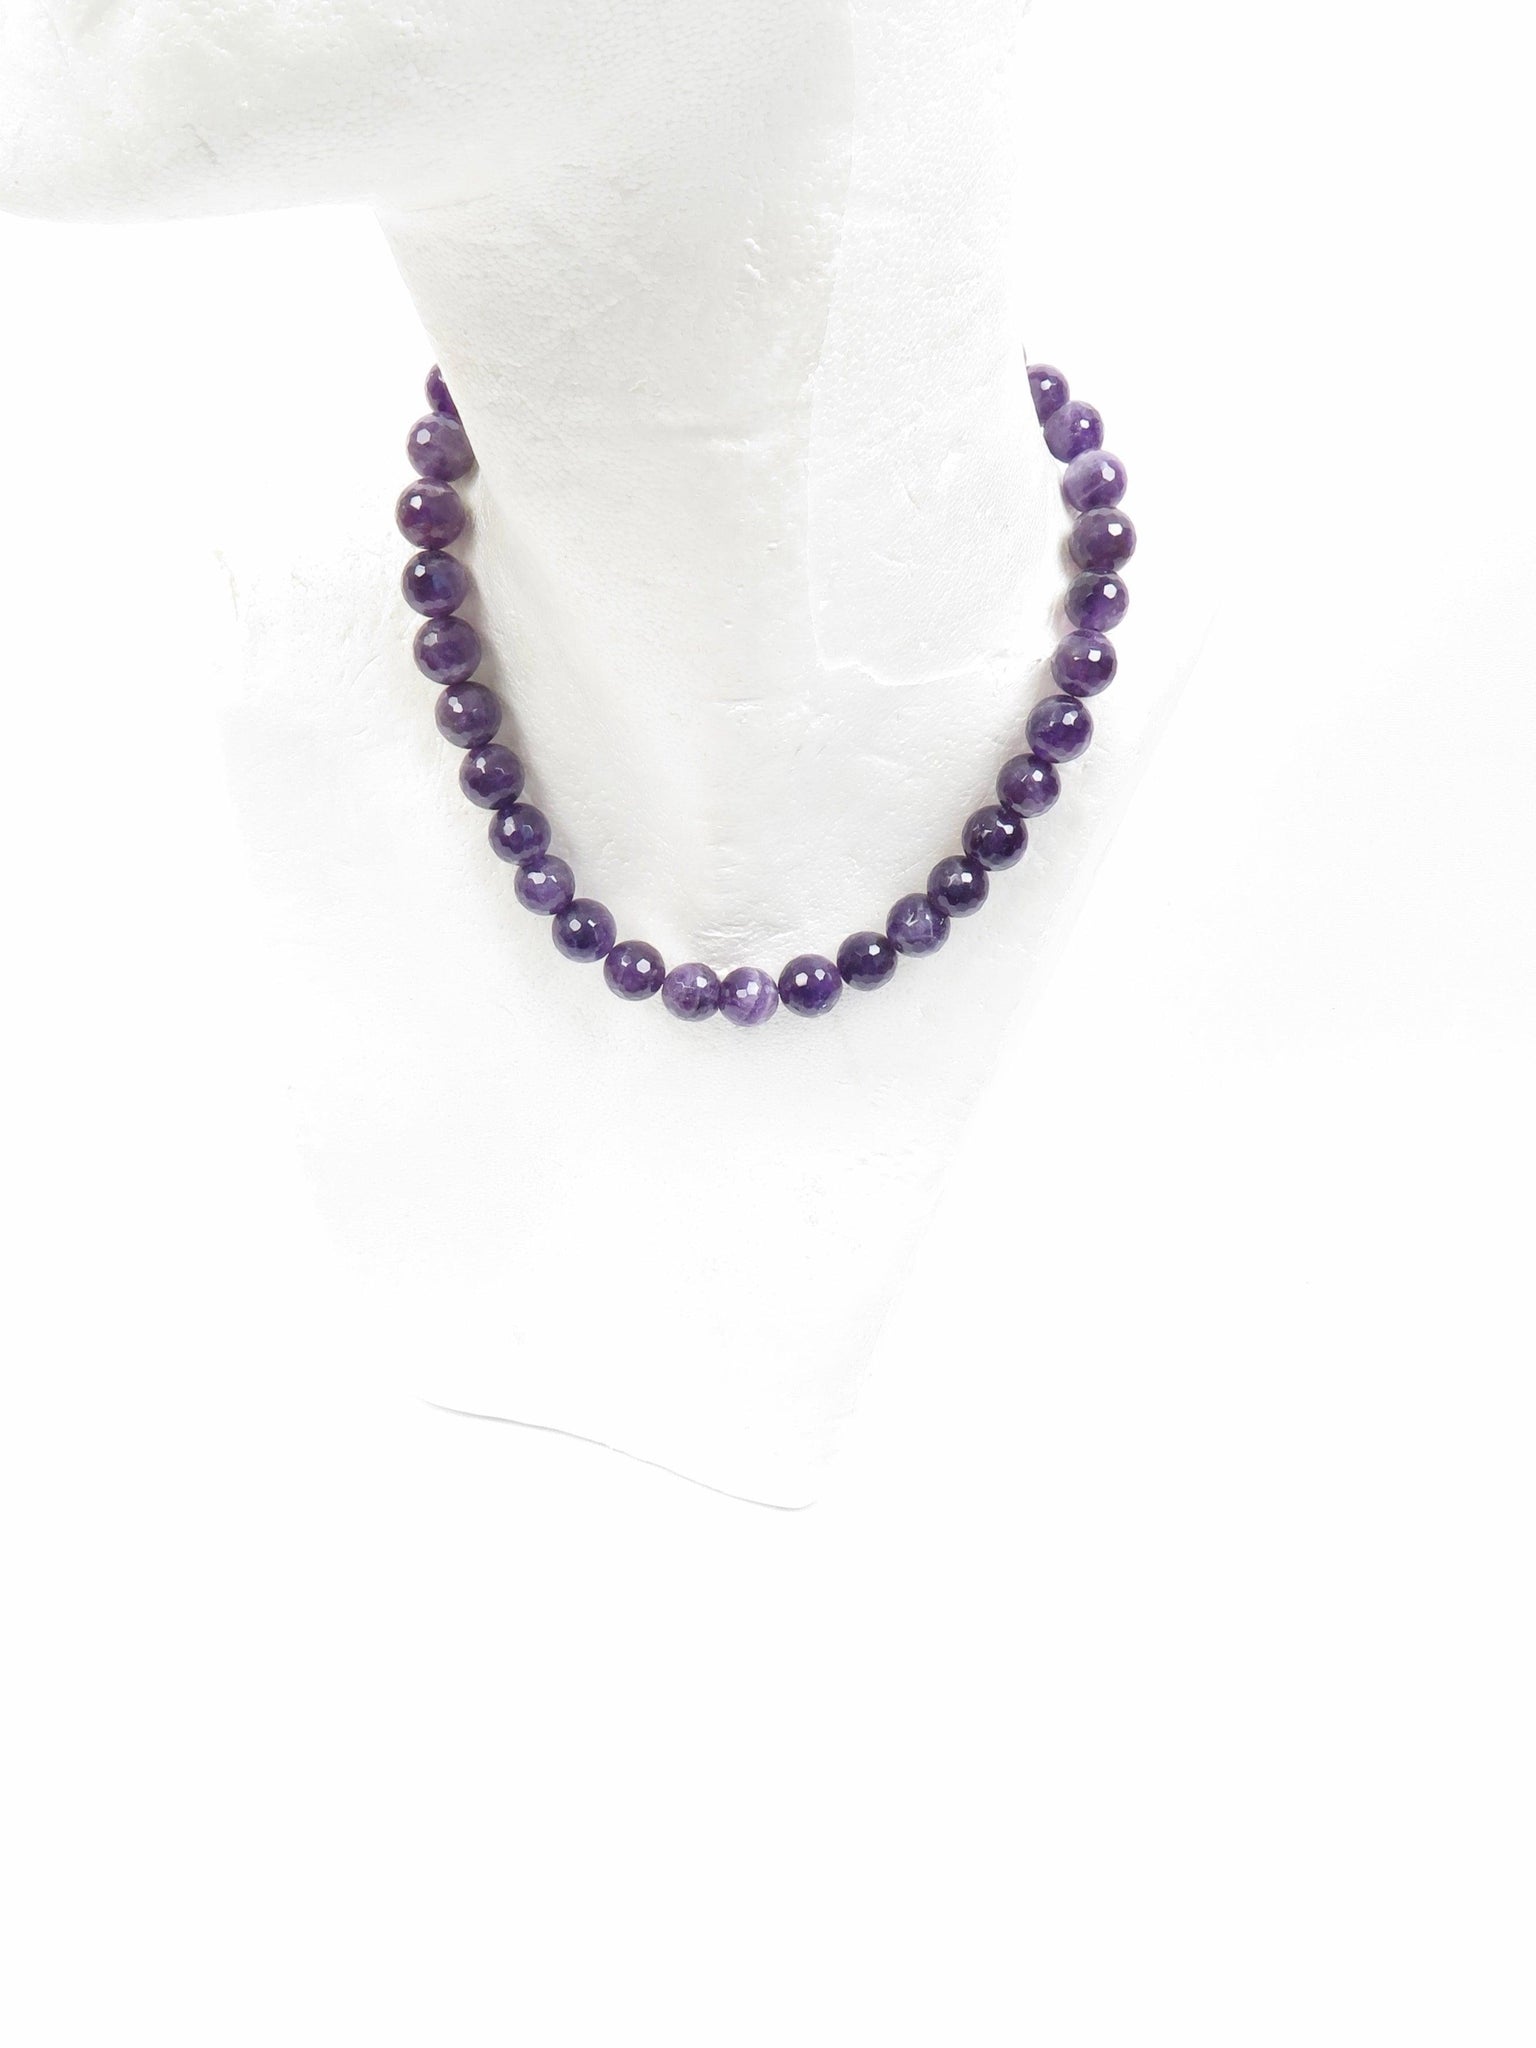 Amethyst Faceted Necklace - The Harlequin